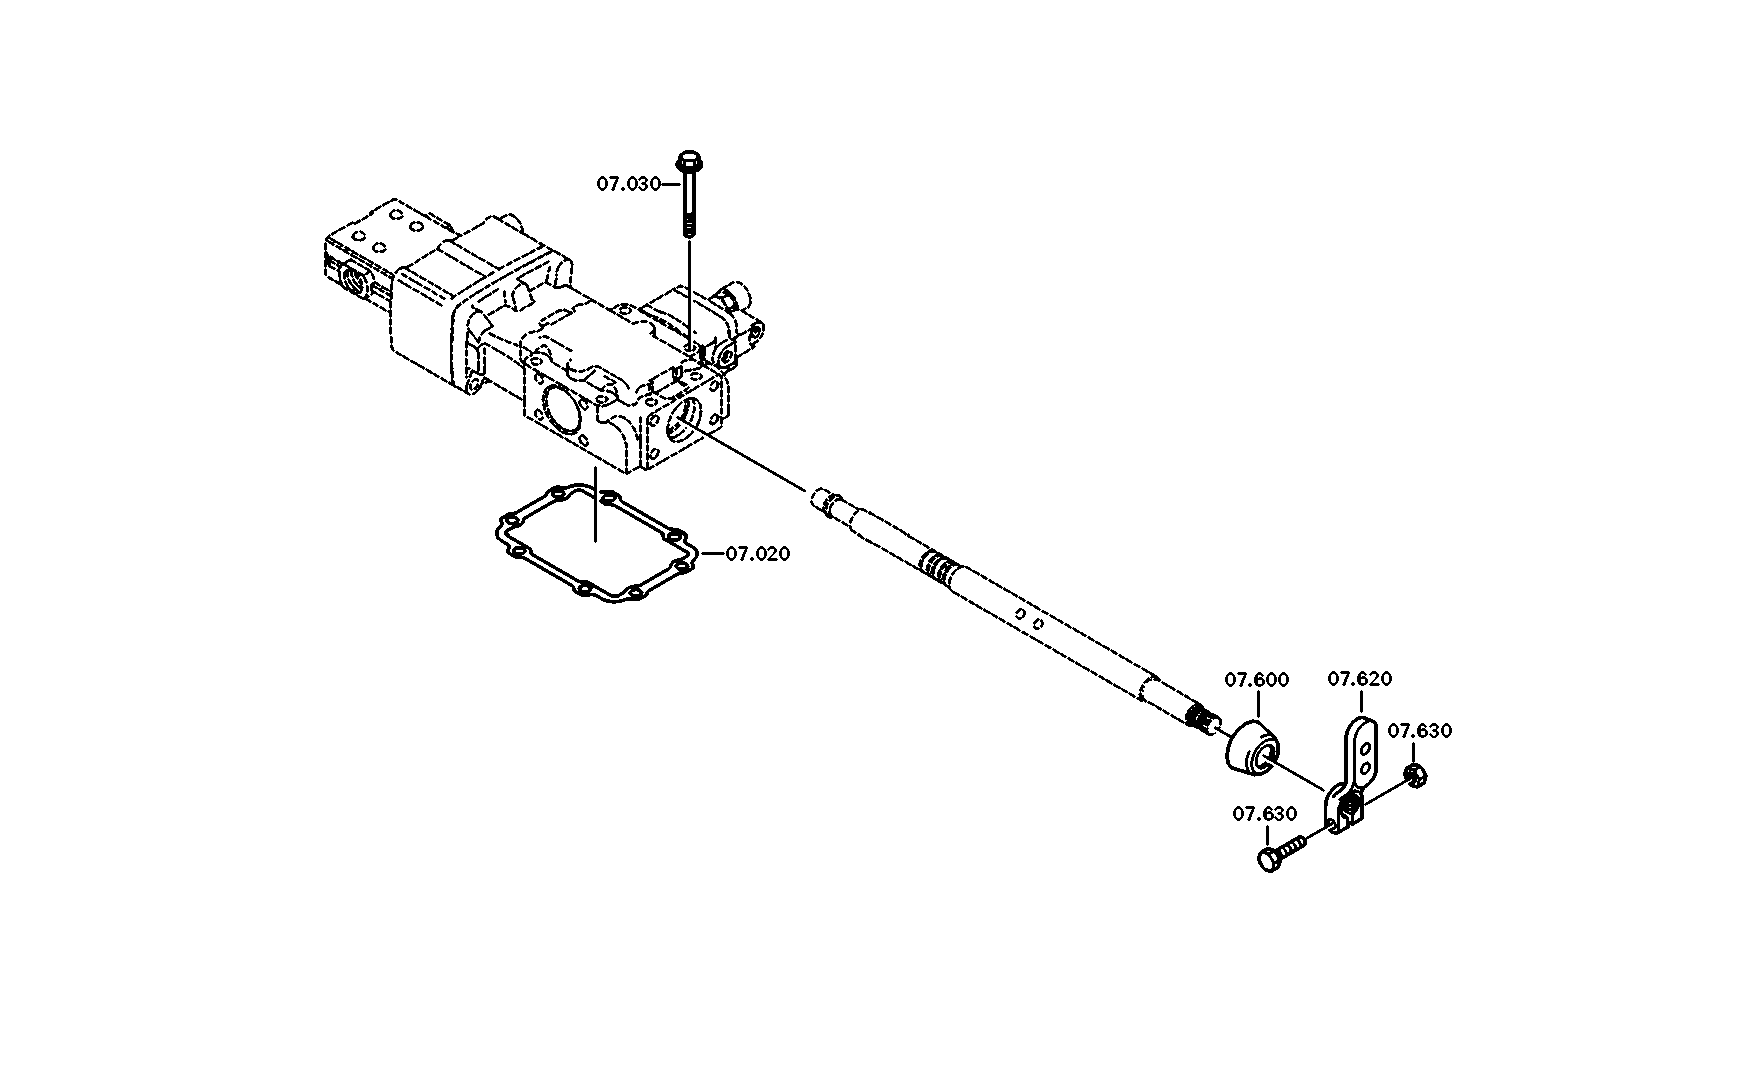 drawing for Astra Veicoli Industriali 00111960 - SHIFT LEVER (figure 2)